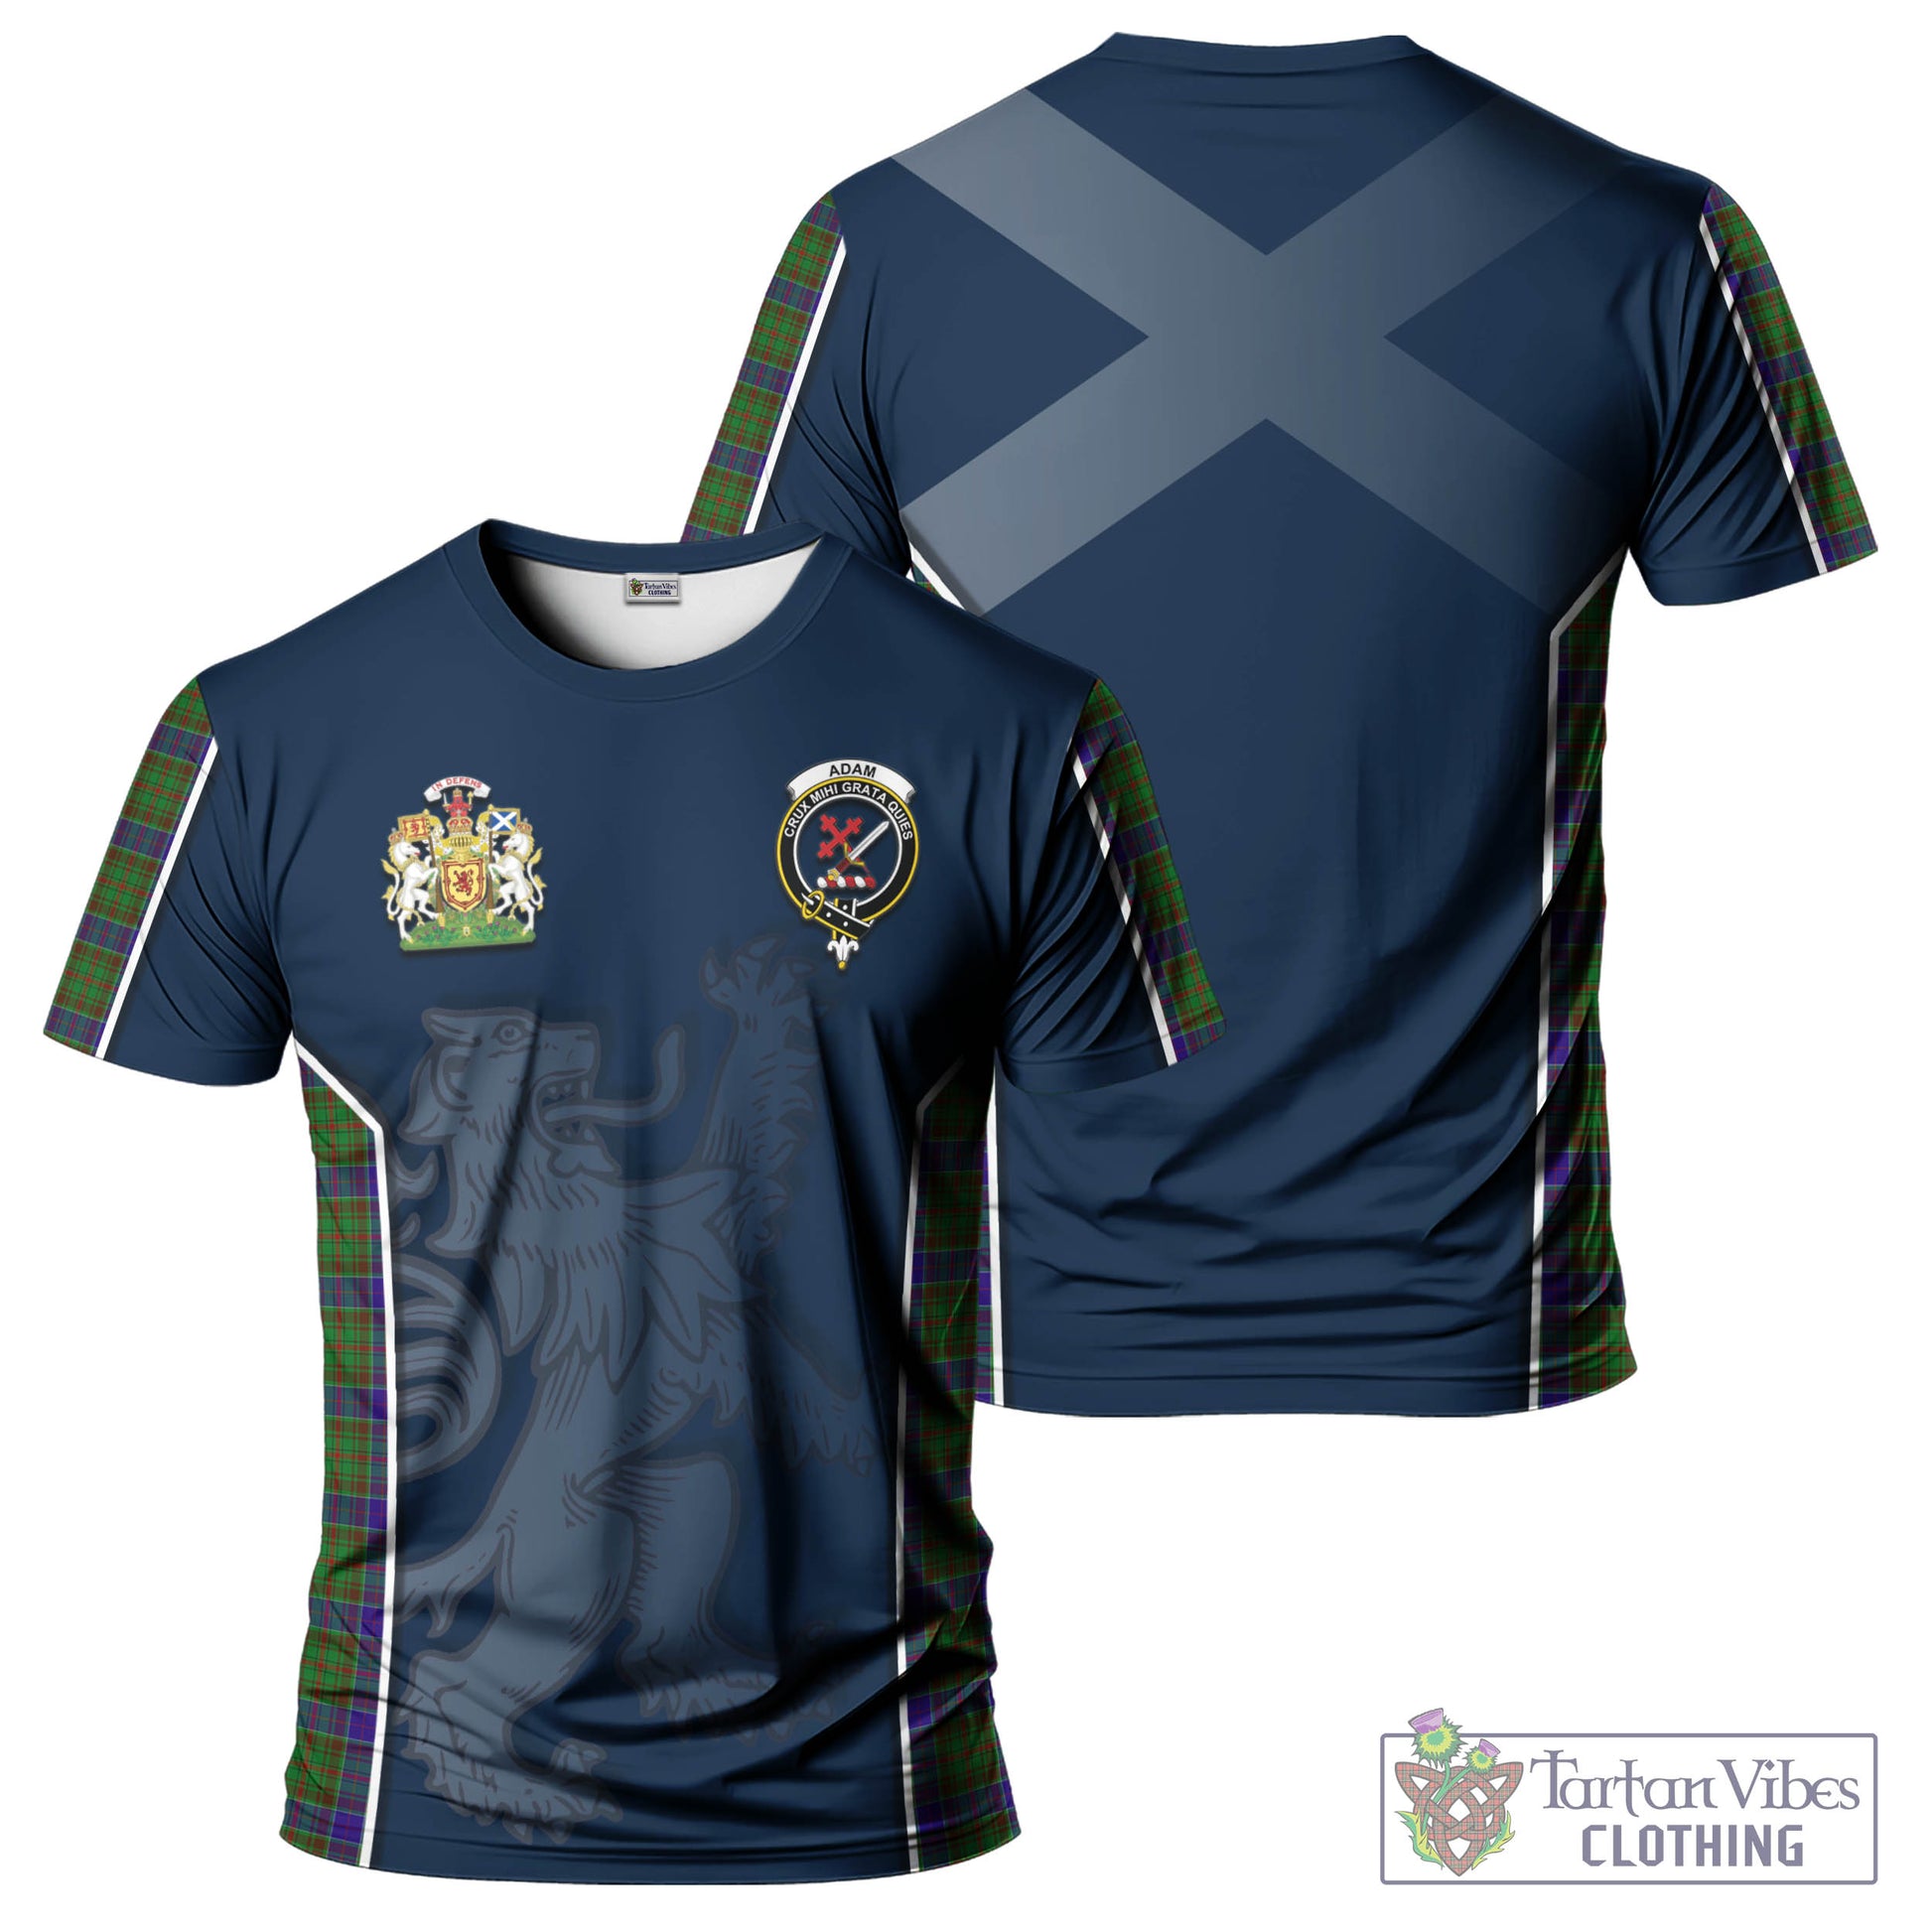 Tartan Vibes Clothing Adam Tartan T-Shirt with Family Crest and Lion Rampant Vibes Sport Style